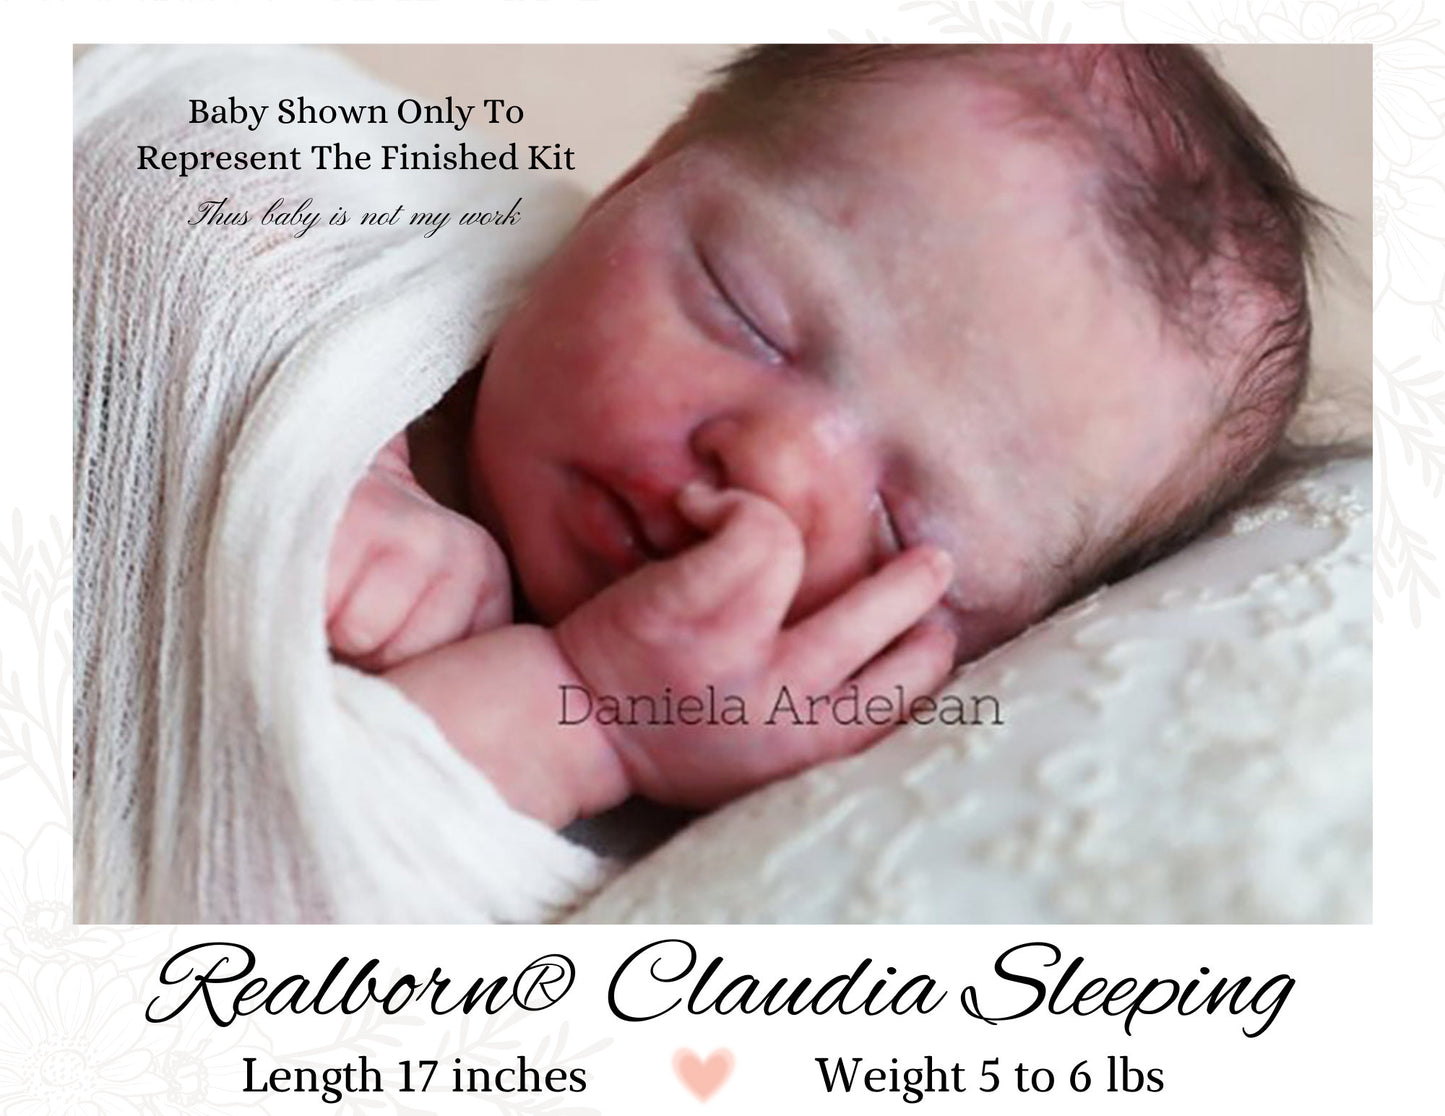 SiLiCoNe BaBy Realborn® Claudia Sleeping (18" Full Limbs) with cloth body. Extended Processing Time May Be Required. ASK FIRST!